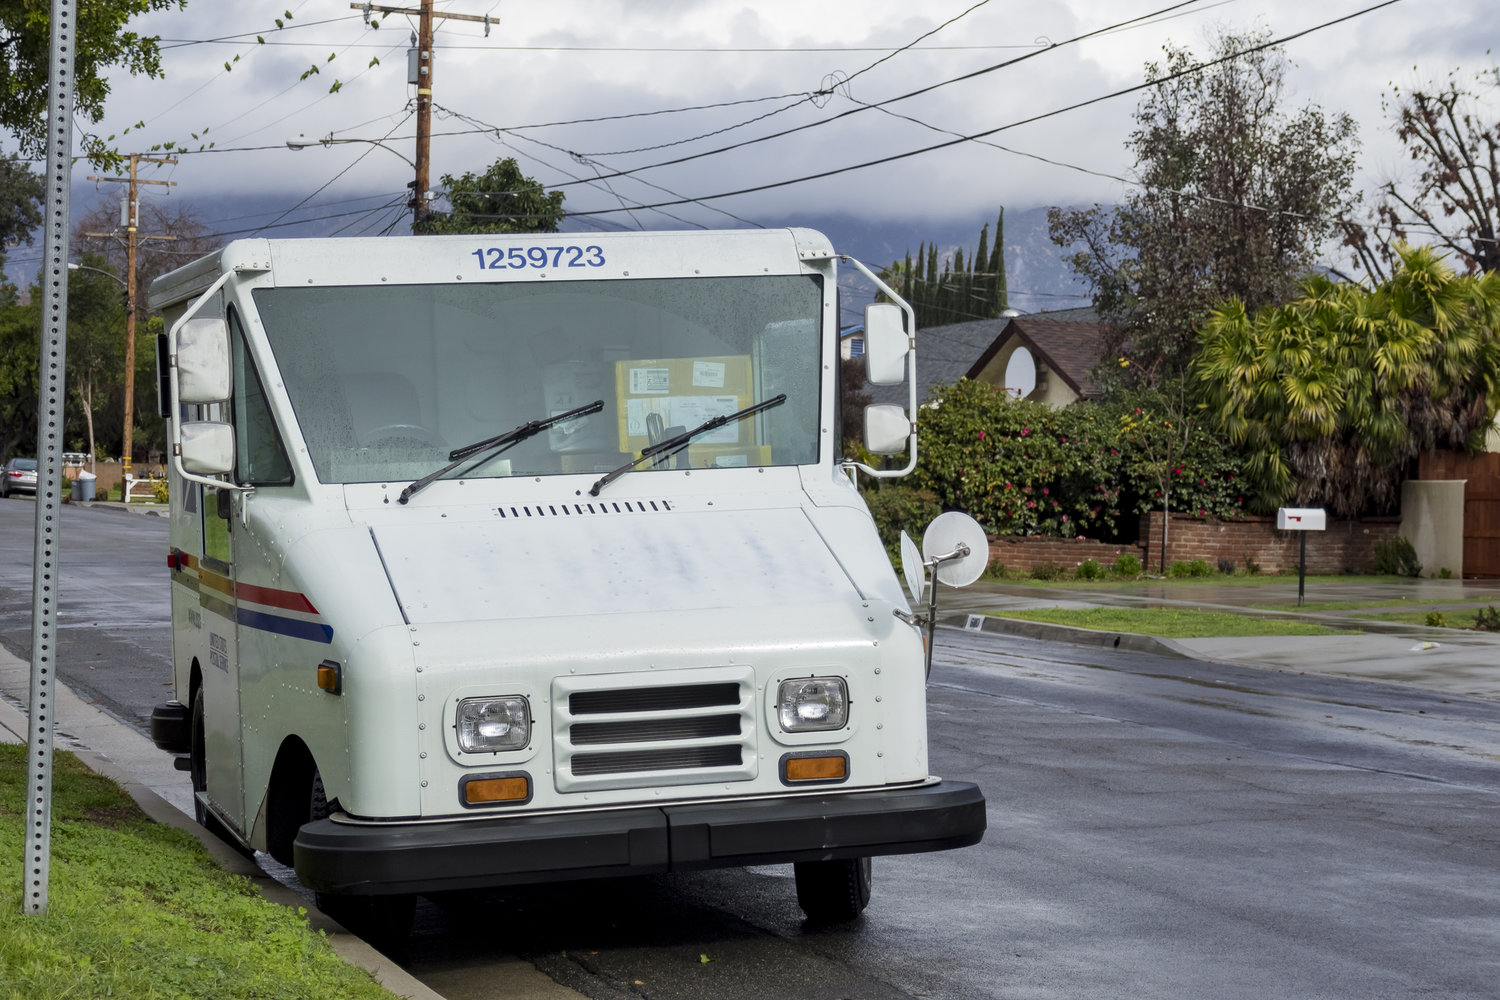 A USPS vehicle is pictured. (Dreamstime/TNS)